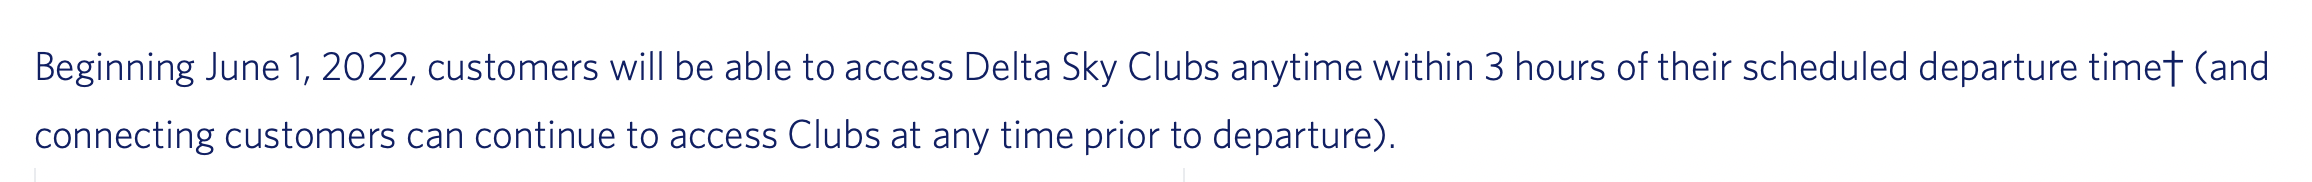 Delta Reversed Unpopular SkyClub Change But Never Bothered To Update Its Website